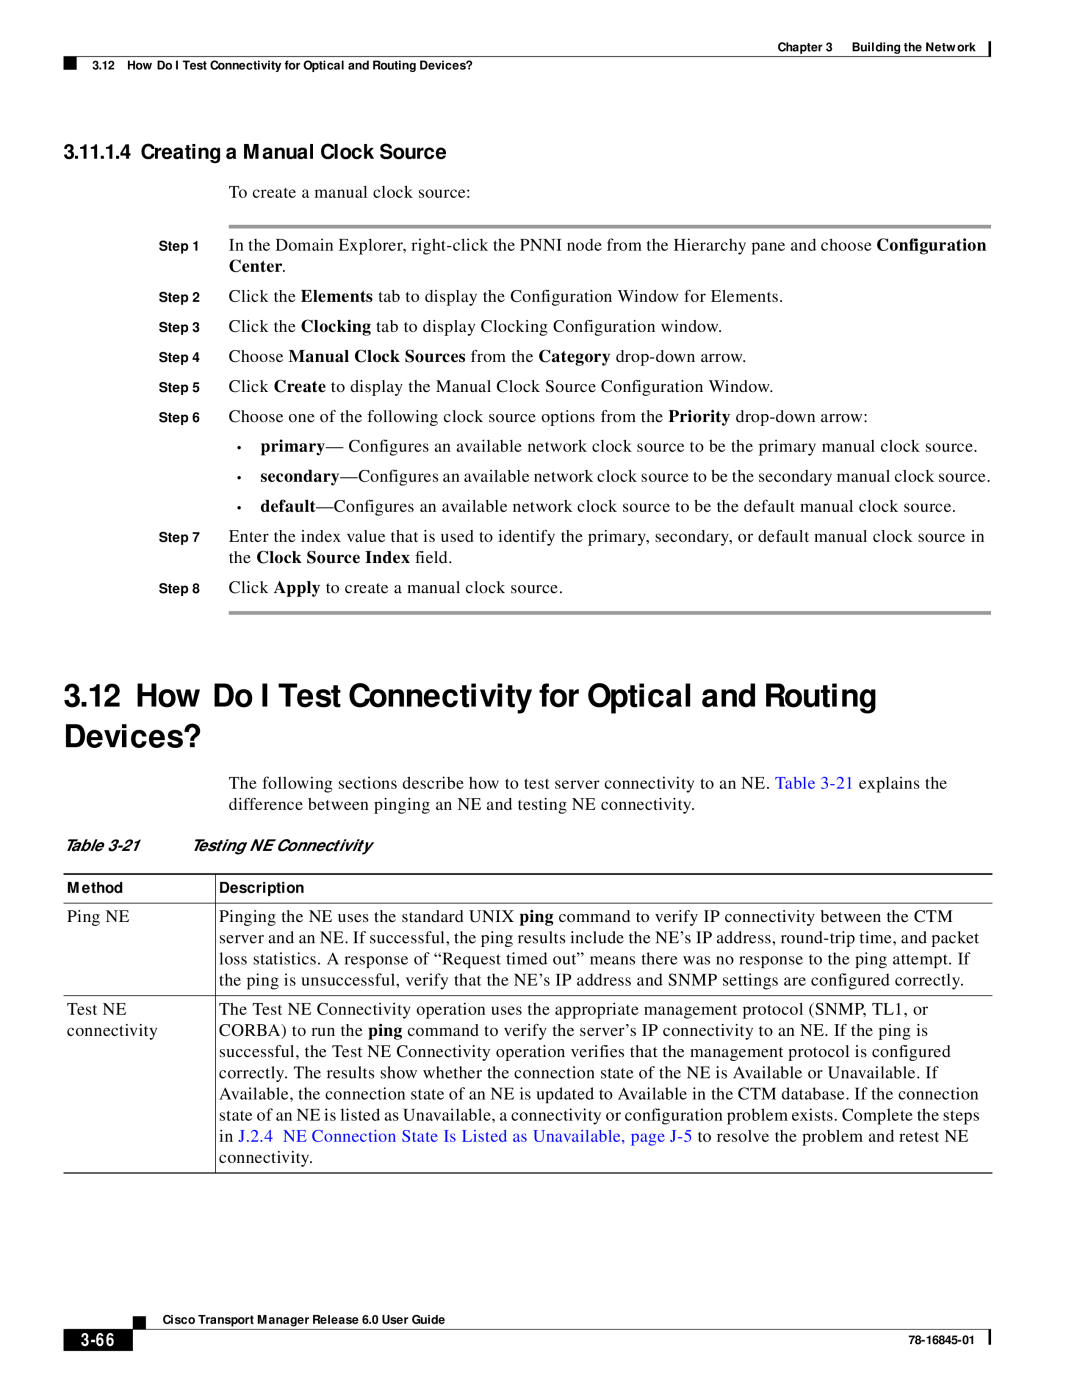 Cisco Systems 78-16845-01 How Do I Test Connectivity for Optical and Routing Devices?, Creating a Manual Clock Source 